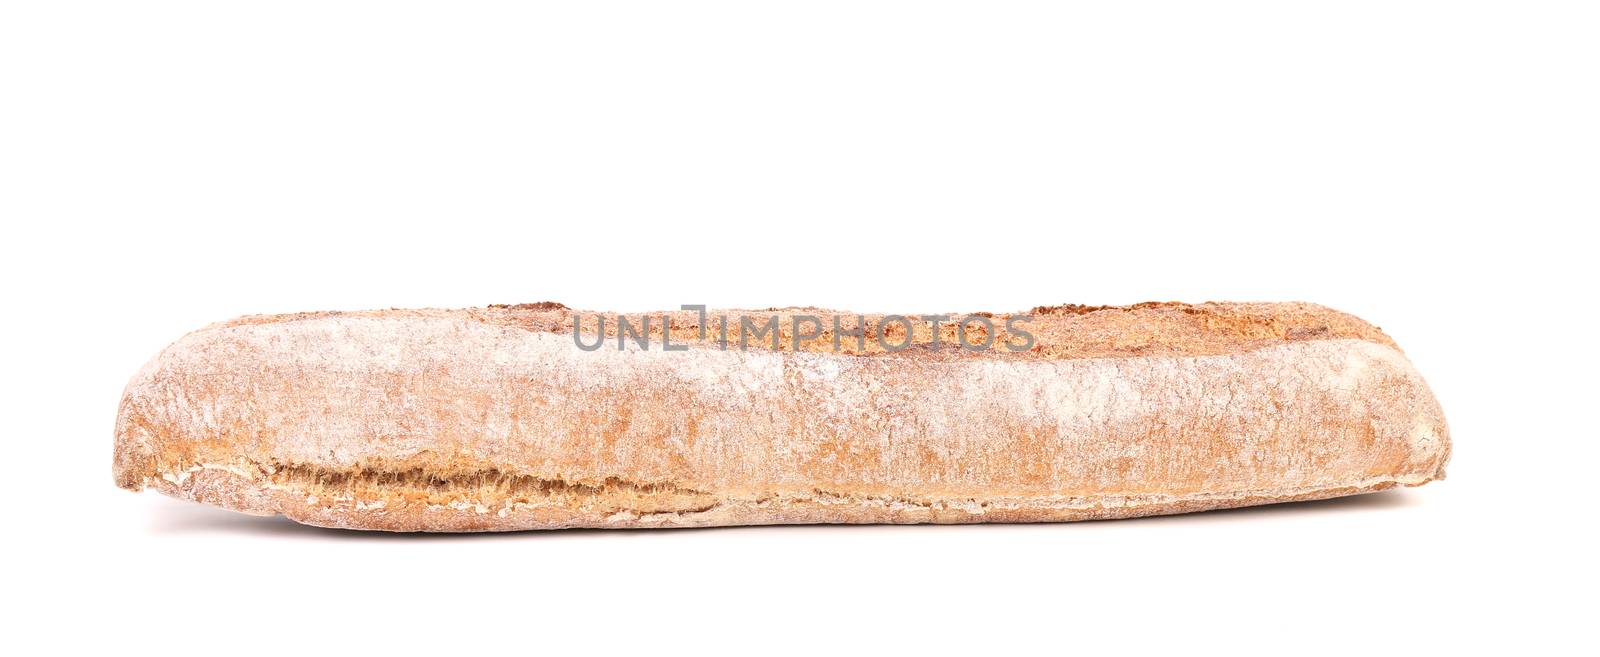 Crispy baguette. Isolated on a white background.